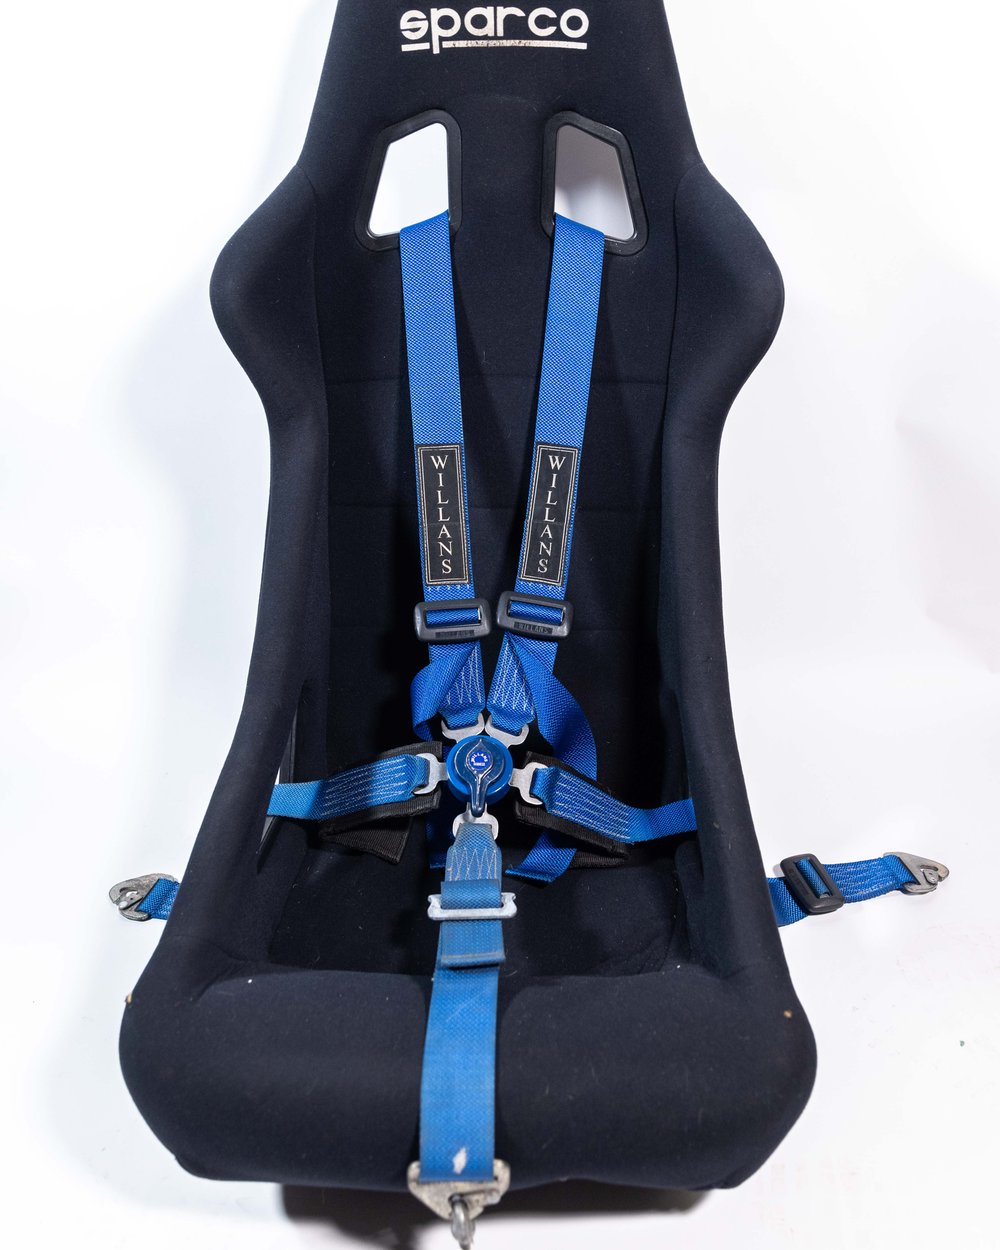 WILLANS Blue 5-Point Racing Harness